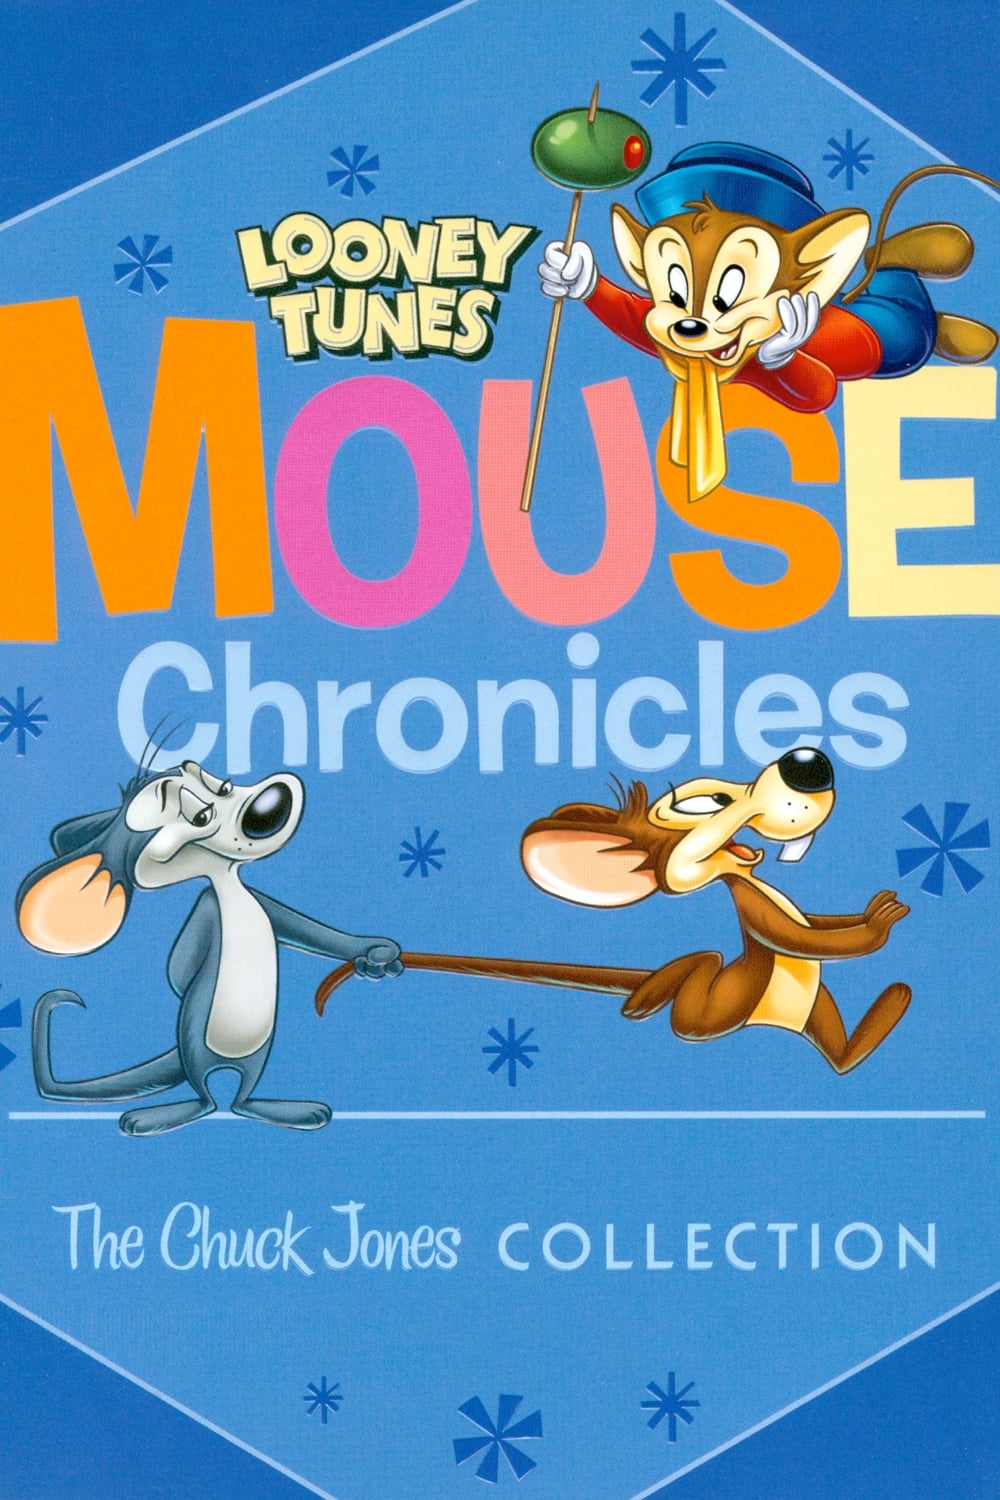 Looney Tunes Mouse Chronicles: The Chuck Jones Collection (2012)